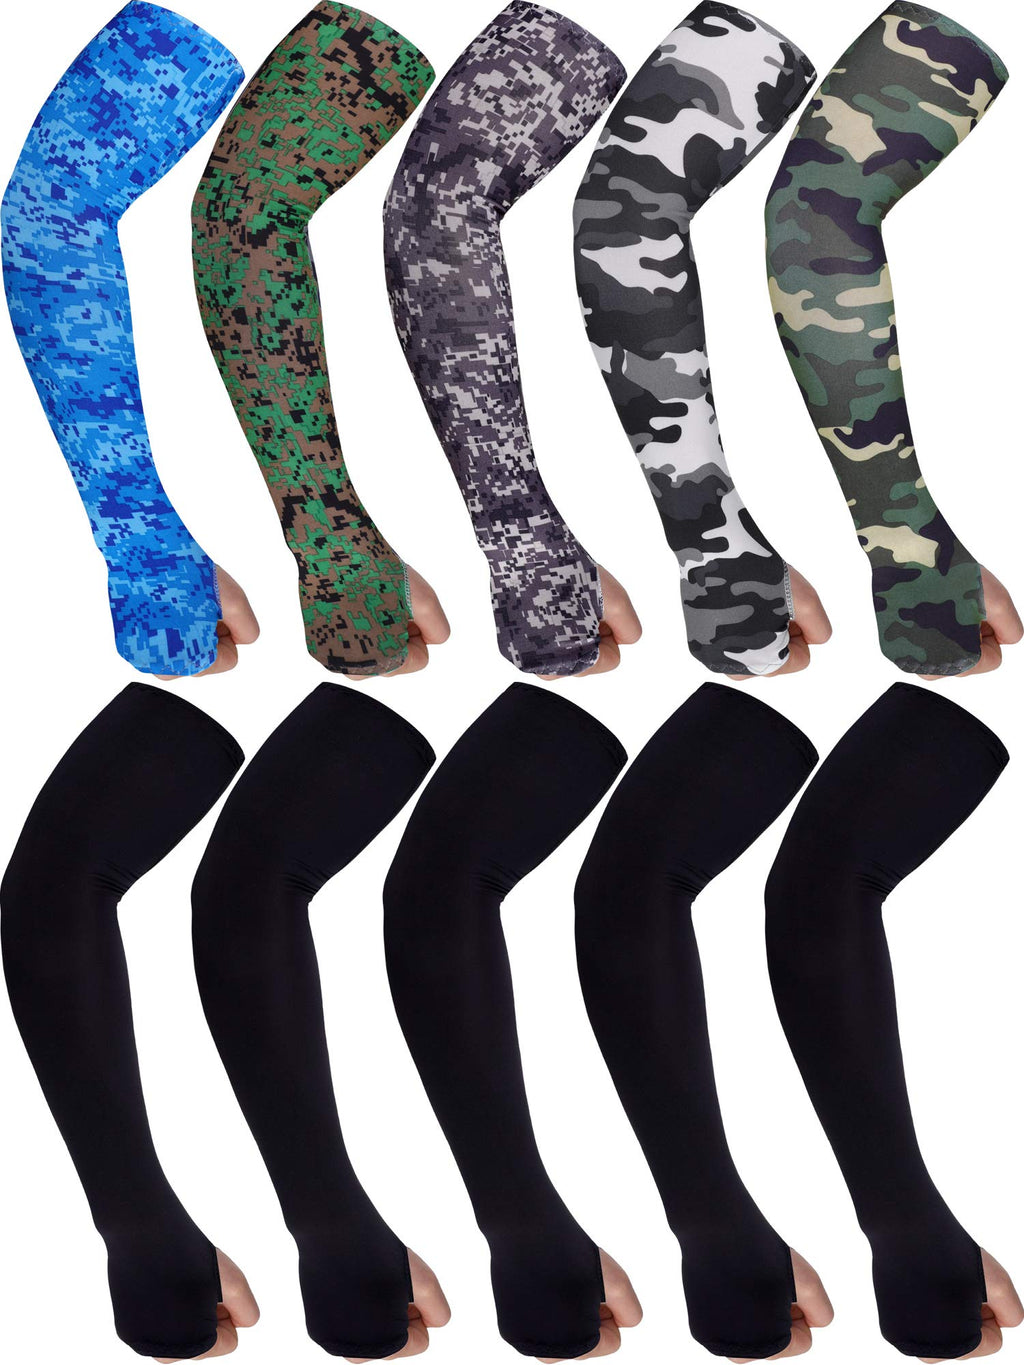  [AUSTRALIA] - 10 Pairs Men's Cooling Arm Sleeves Long Fingerless Gloves Anti Slip Sun Protection Arm Sleeves Black and Mixed Camo